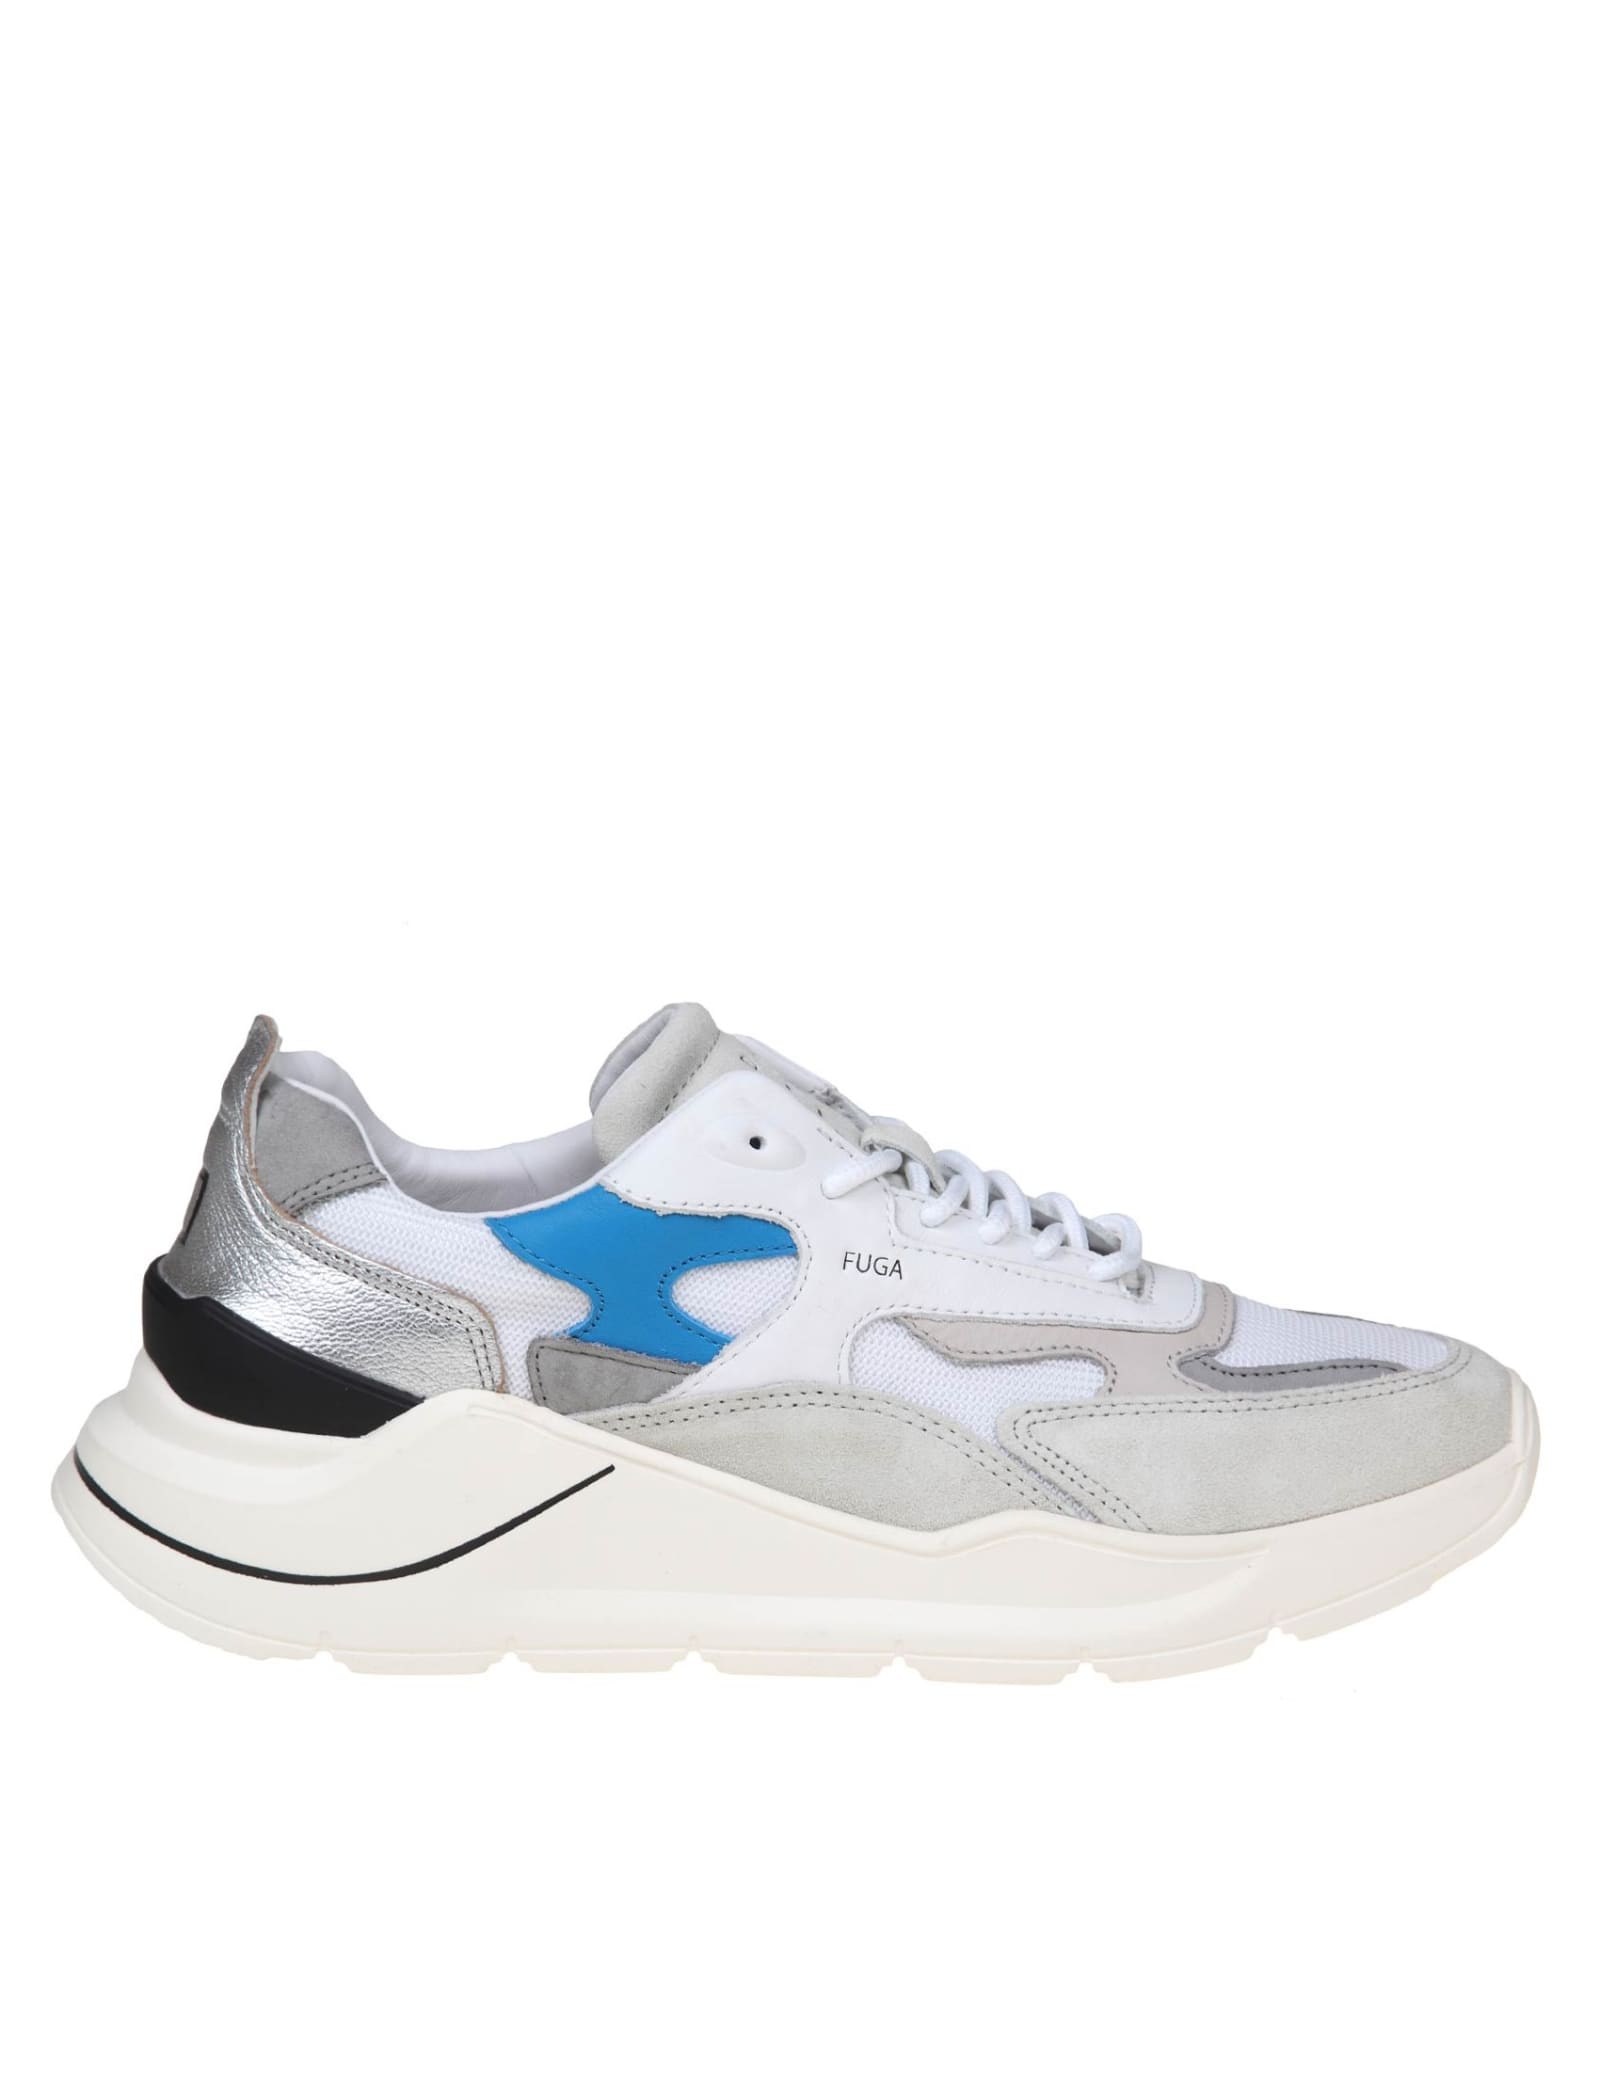 DATE FUGA trainers IN WHITE/SILVER LEATHER AND FABRIC